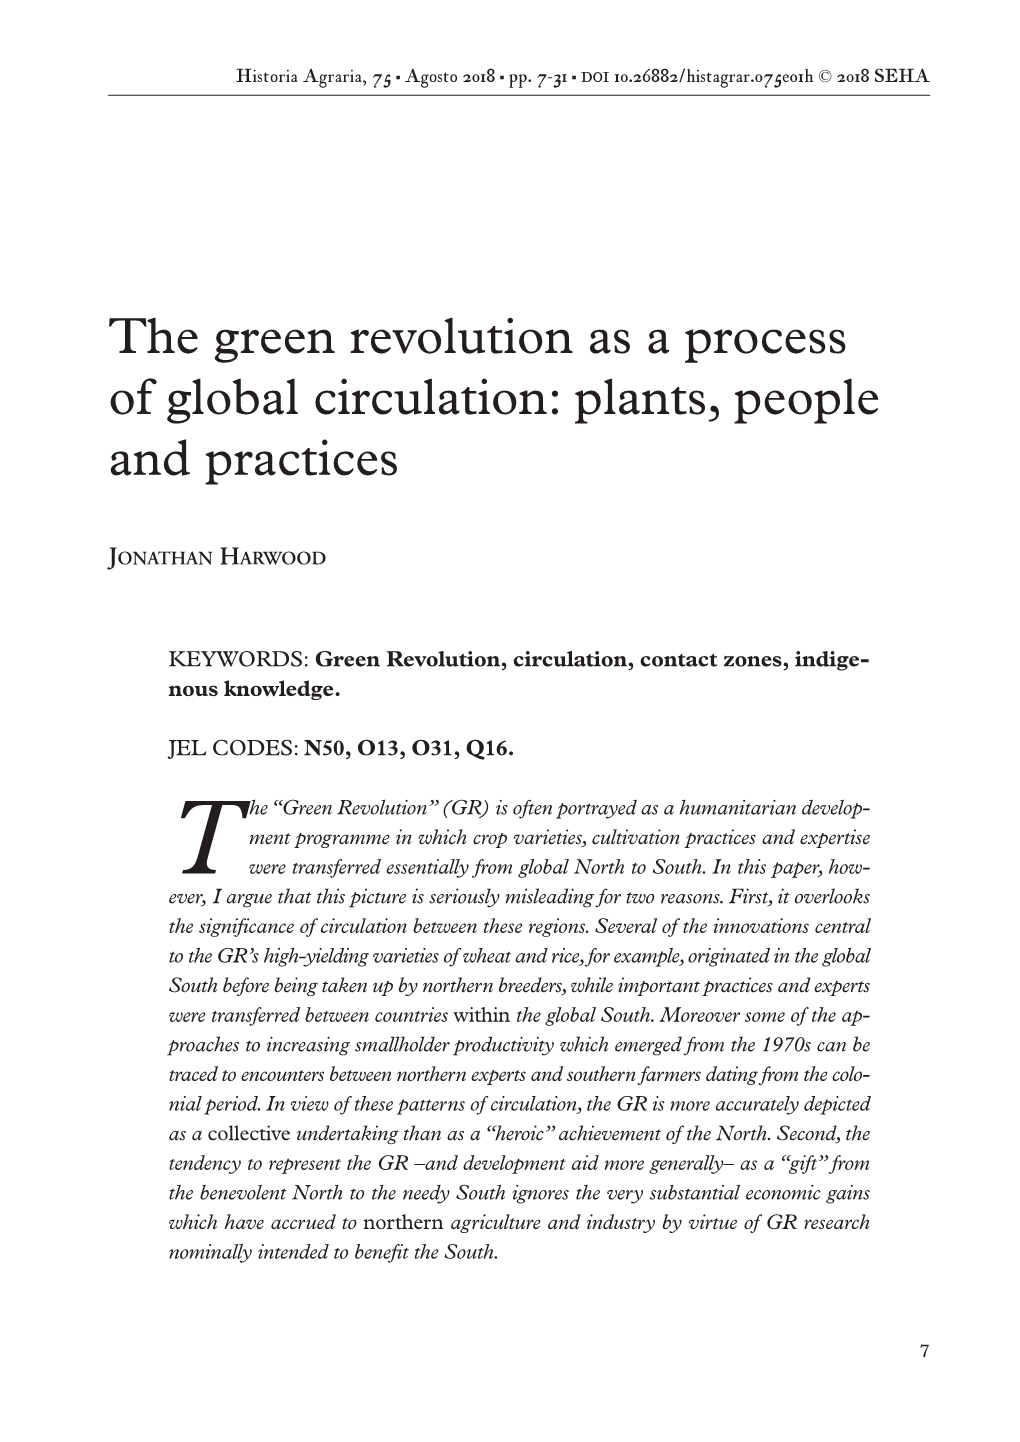 The Green Revolution As a Process of Global Circulation: Plants, People and Practices